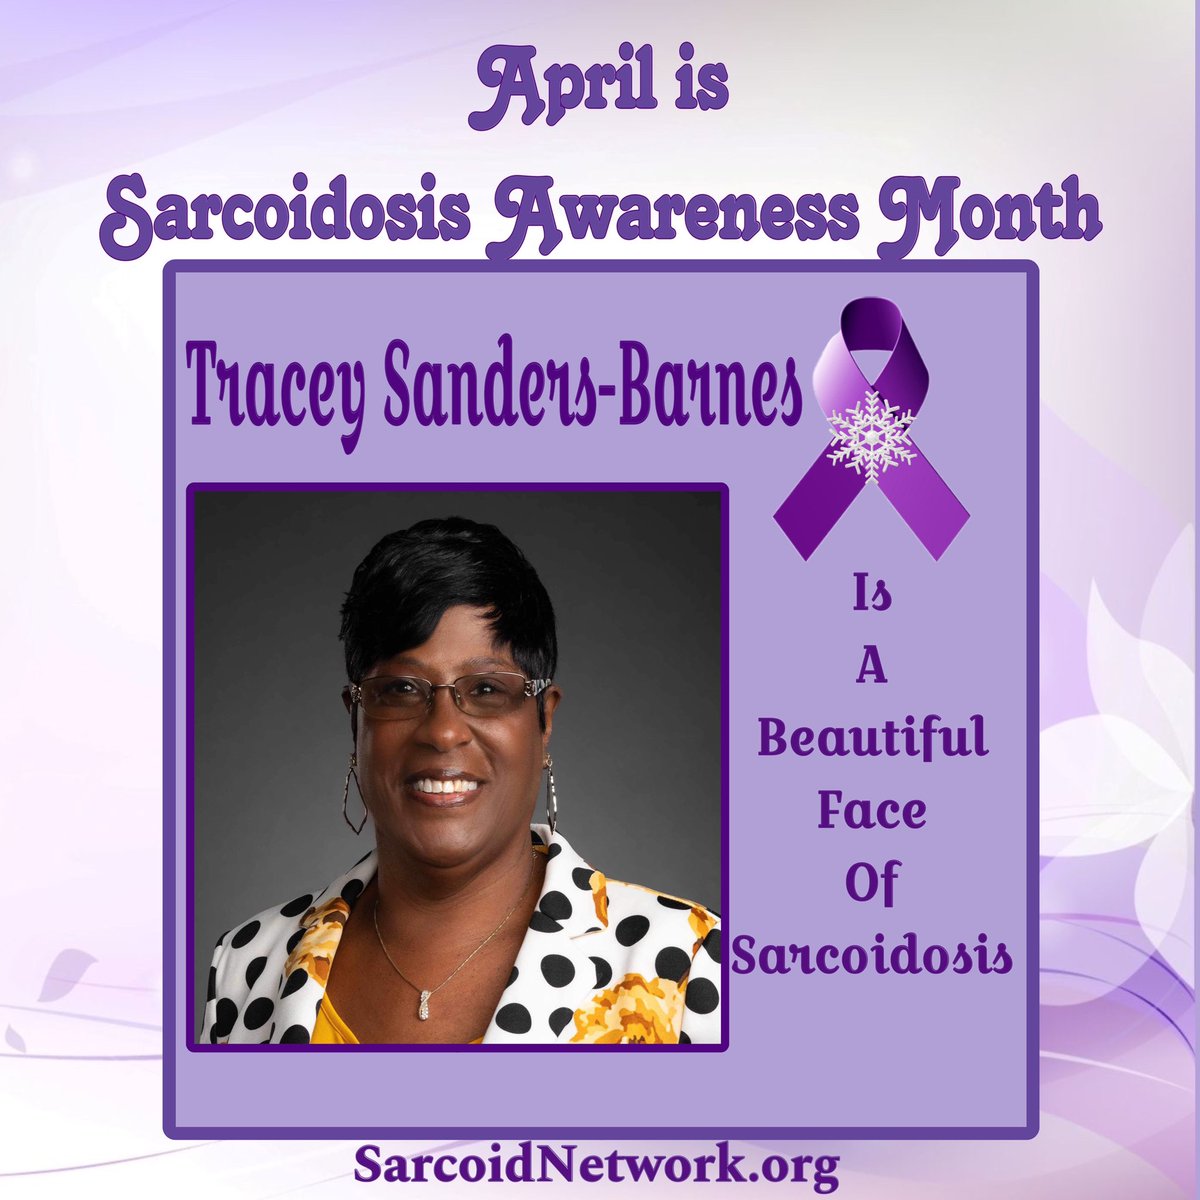 This is our Sarcoidosis Sister Tracey Sanders-Barnes and she is a Beautiful Face of Sarcoidosis!💜

#Sarcoidosis #raredisease #patientadvocate #sarcoidosisadvocate #beautifulfacesofsarcoidosis #sarcoidosisawarenessmonth